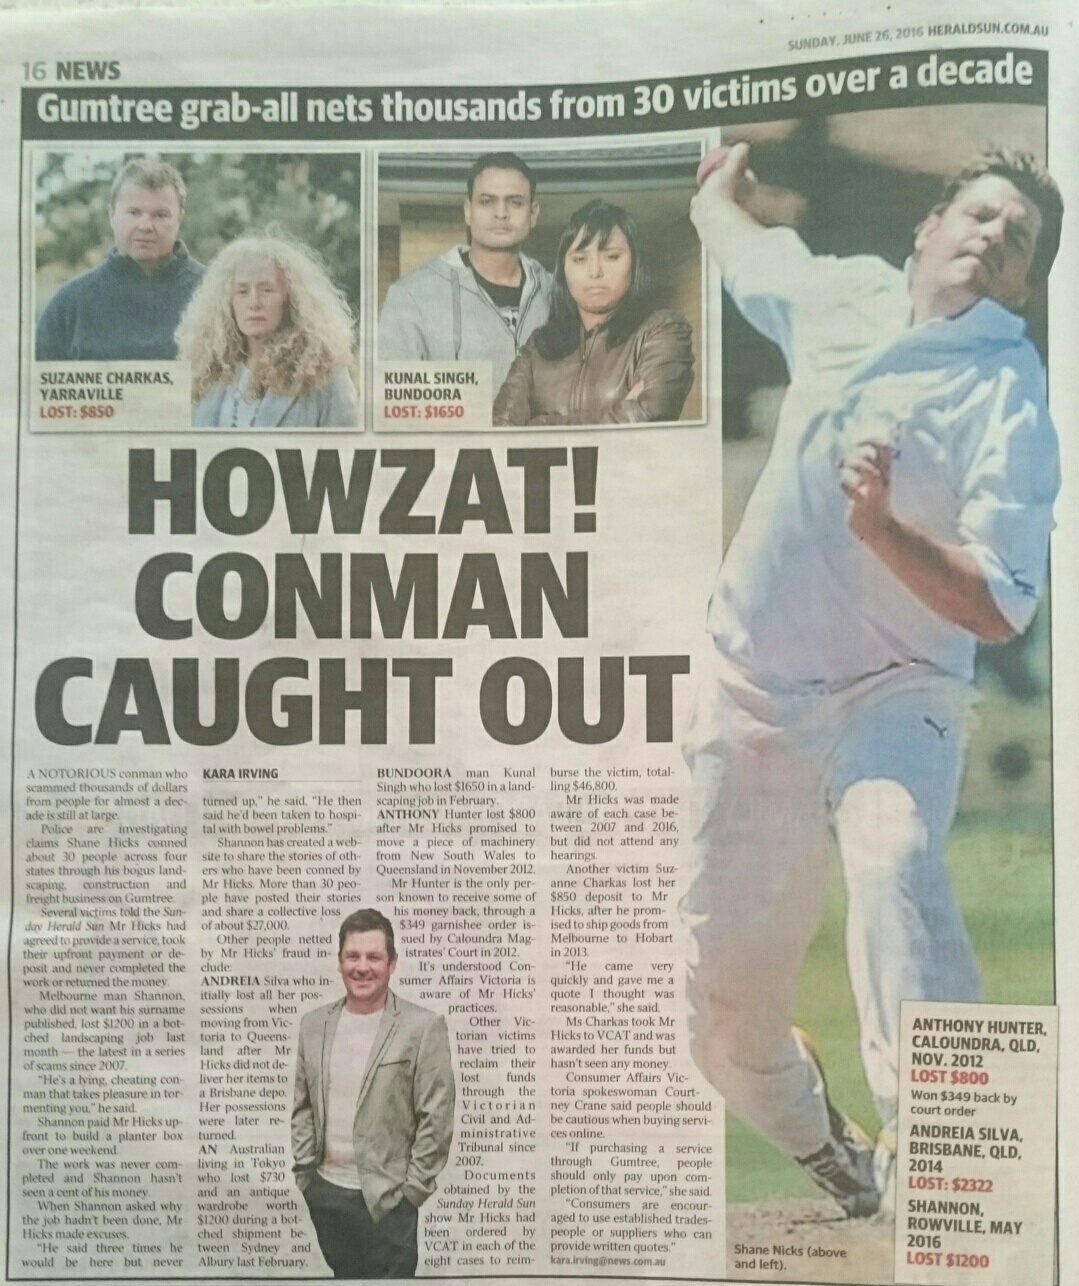 Article published in the Melbourne Herald Sun talking about his escapades